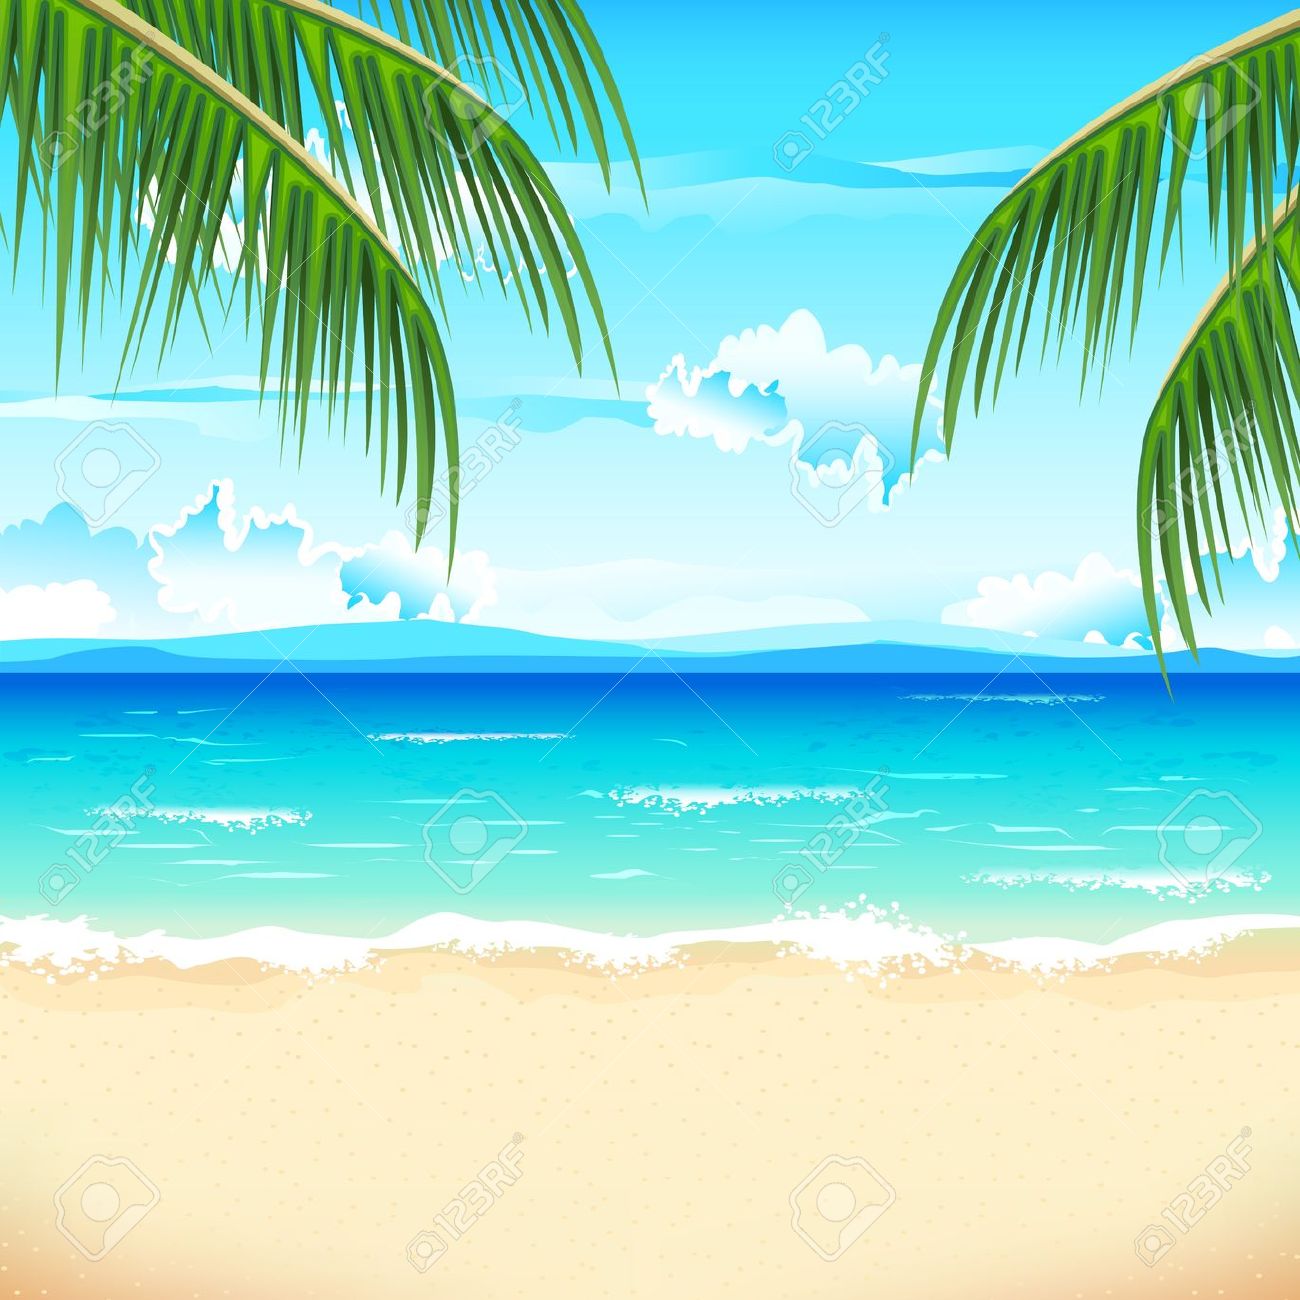 Beach scene stock illustrations cliparts and royalty free beach